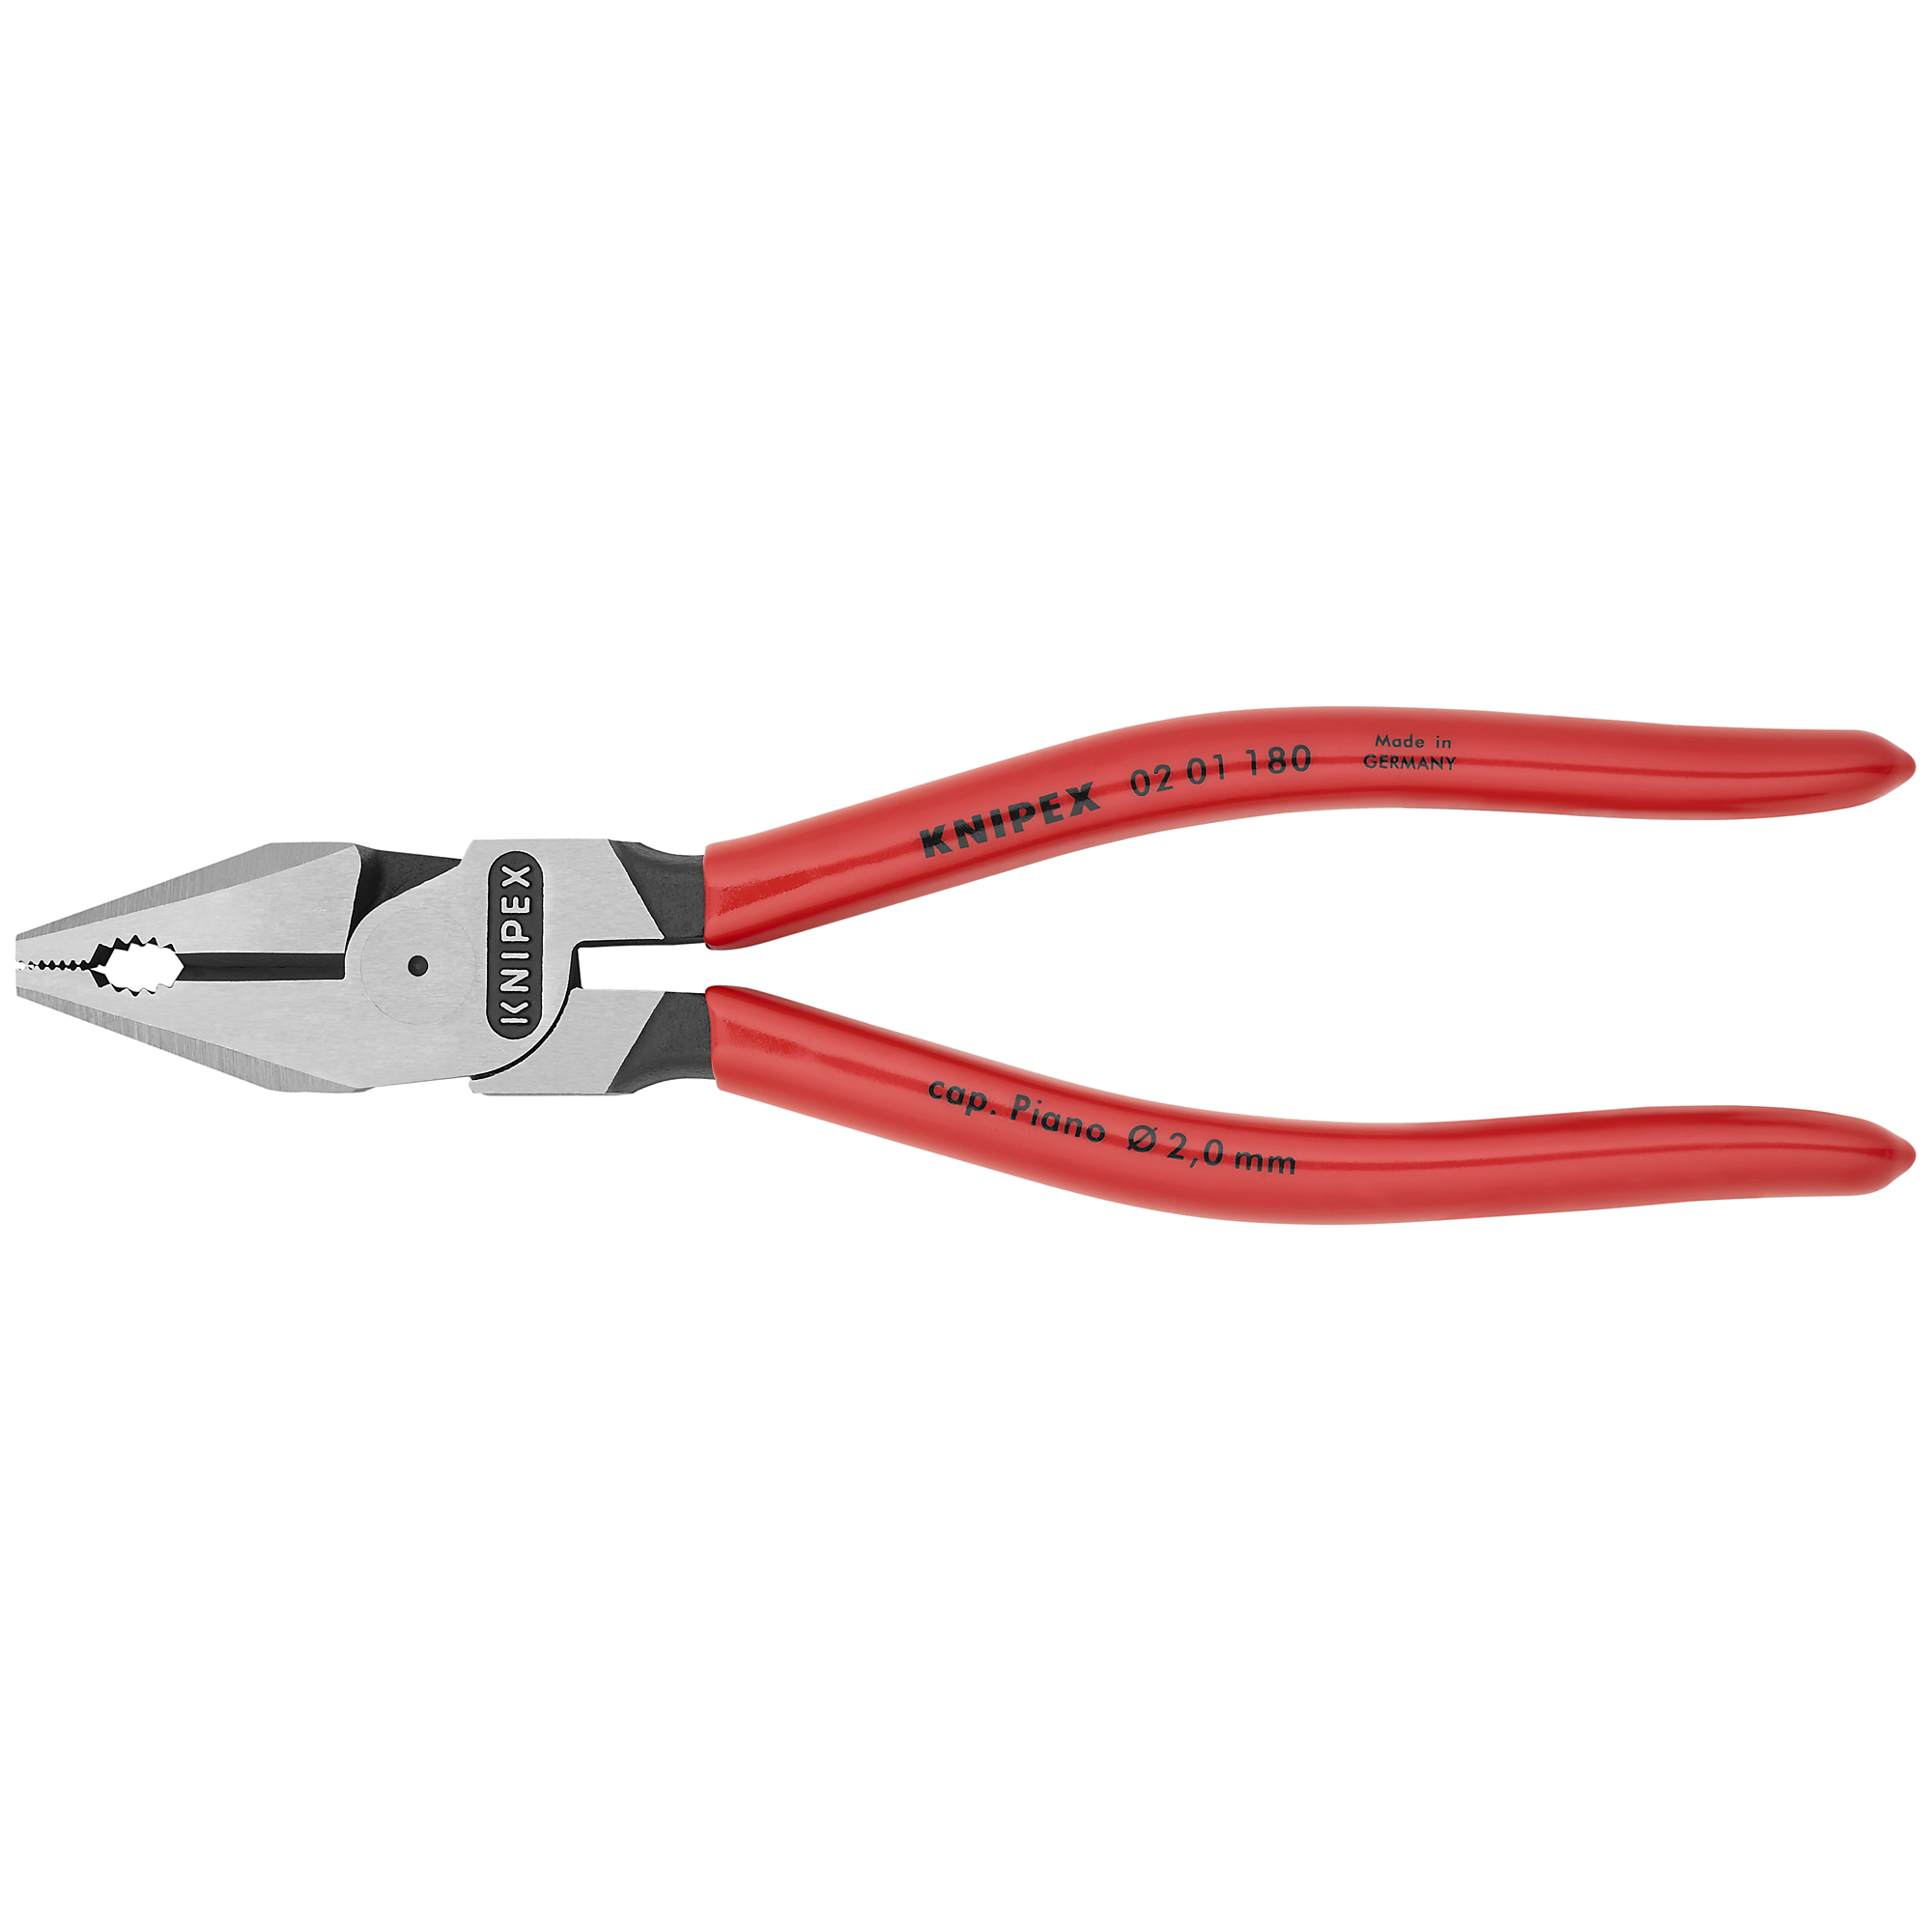 KNIPEX, HL Combination Pliers, Plstic coating, Bulk,7.25Inch, Pieces (qty.) 1 Material Steel, Jaw Capacity 0.094 in, Model 02 01 180